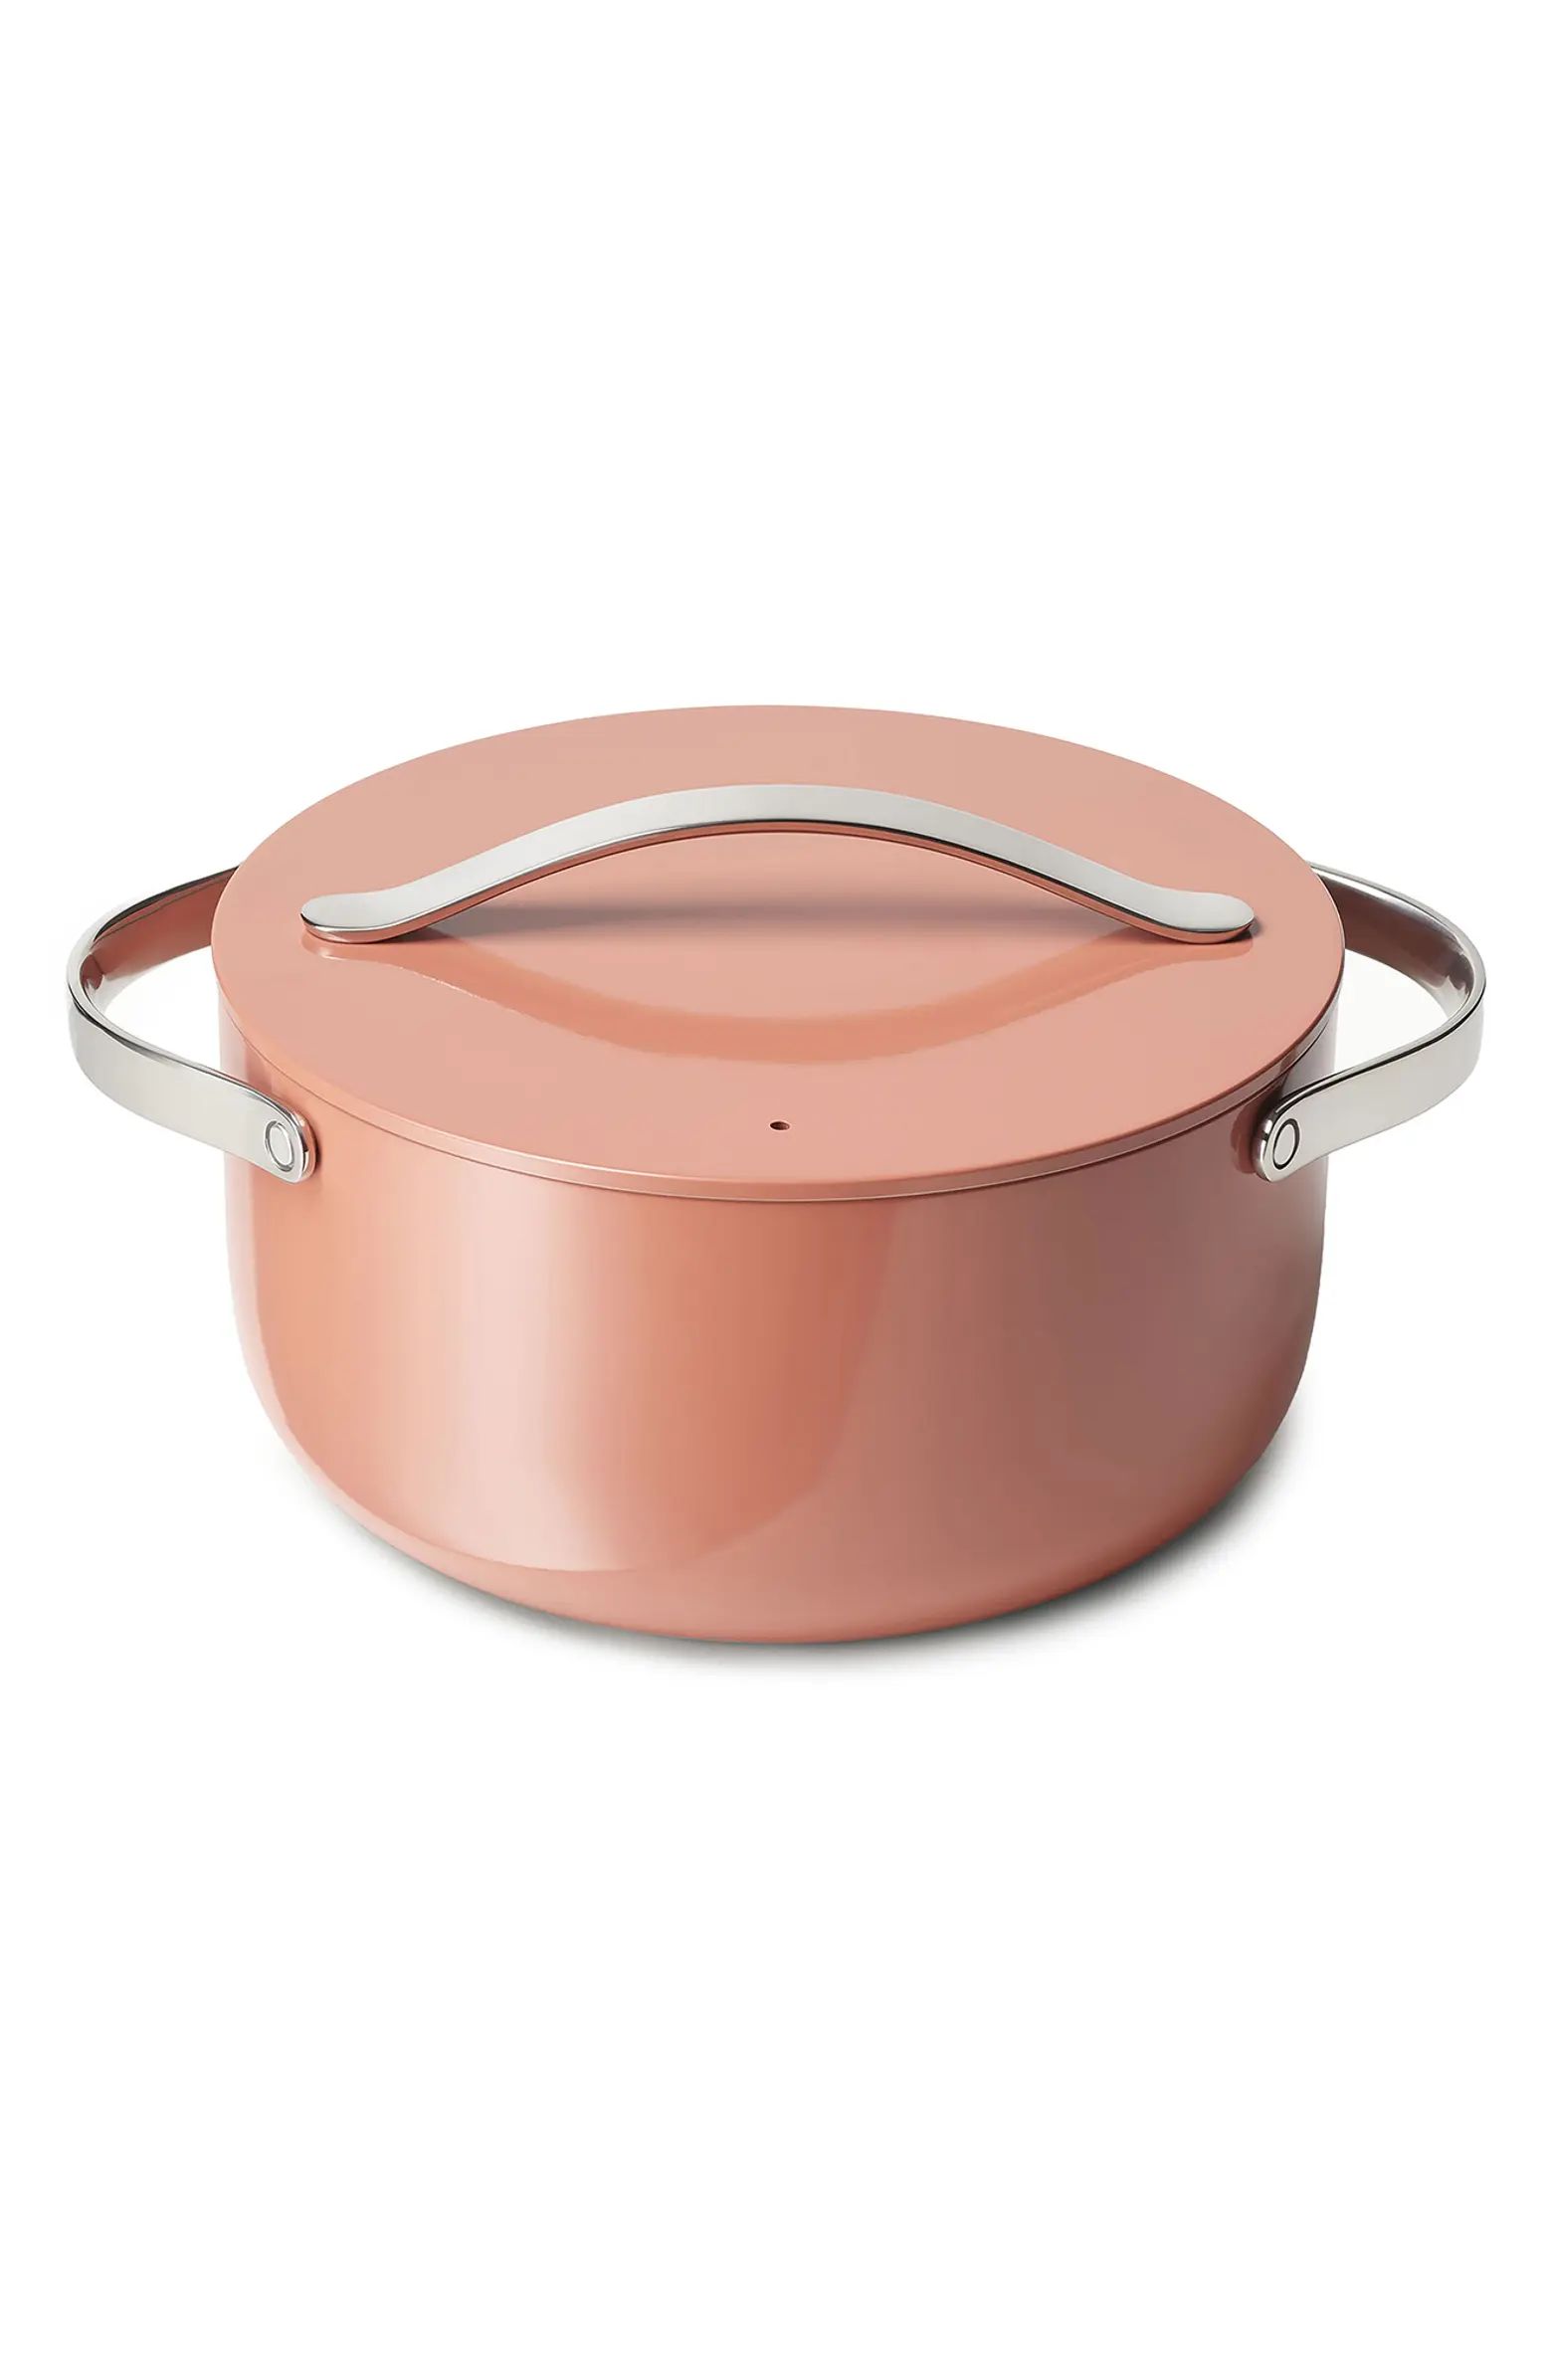 6.5 Quart Dutch Oven With Lid | Nordstrom